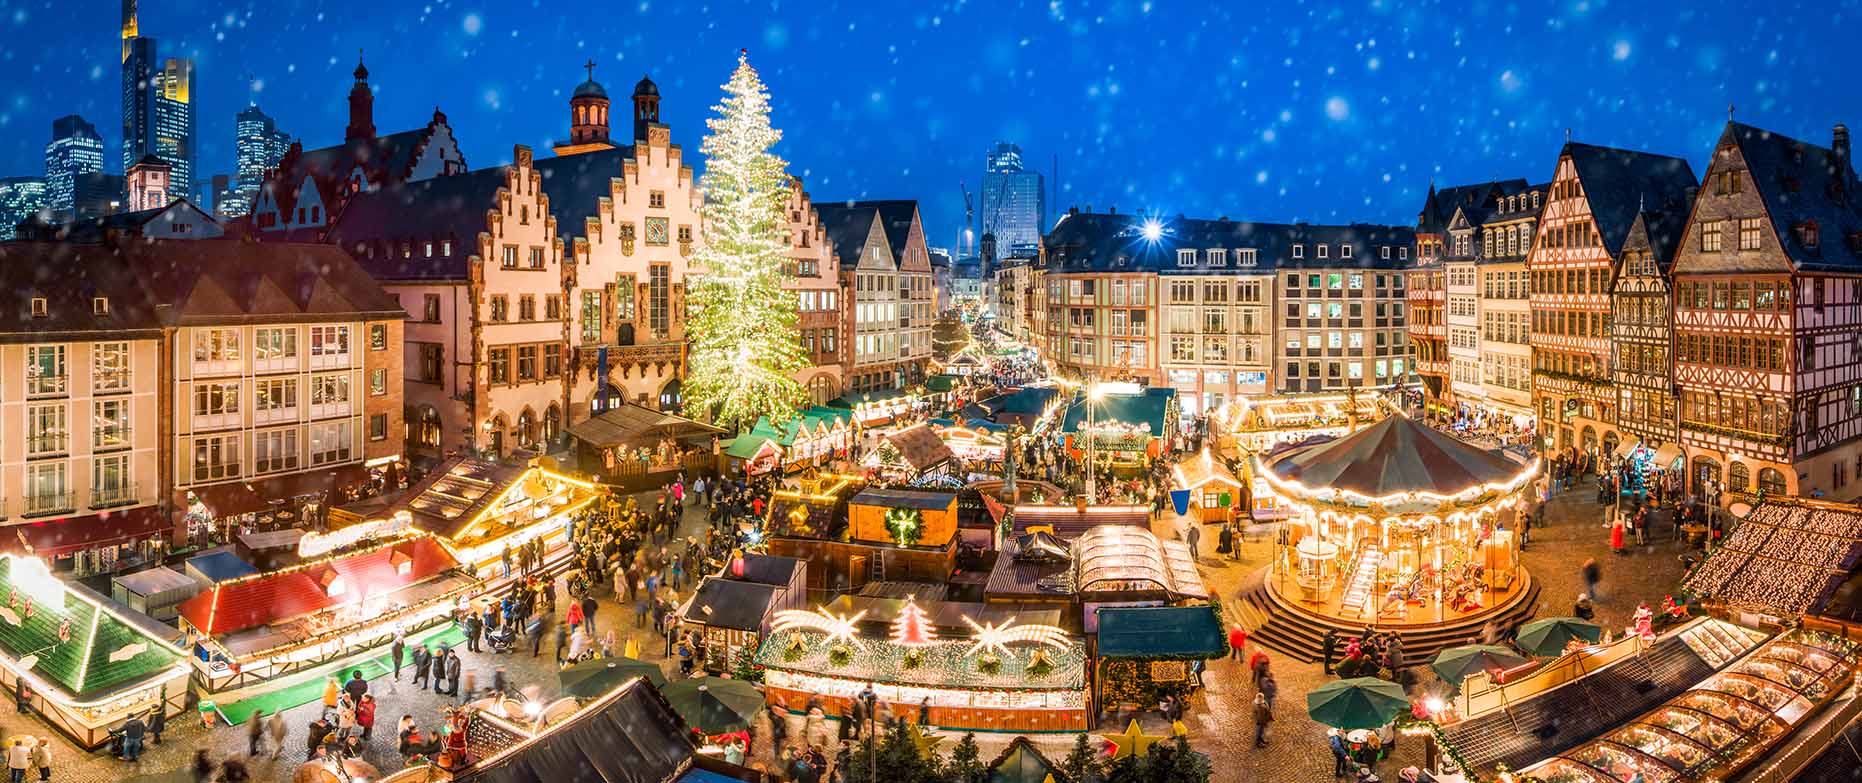 European Christmas Markets River Cruises With 2021 Pricing - Riv